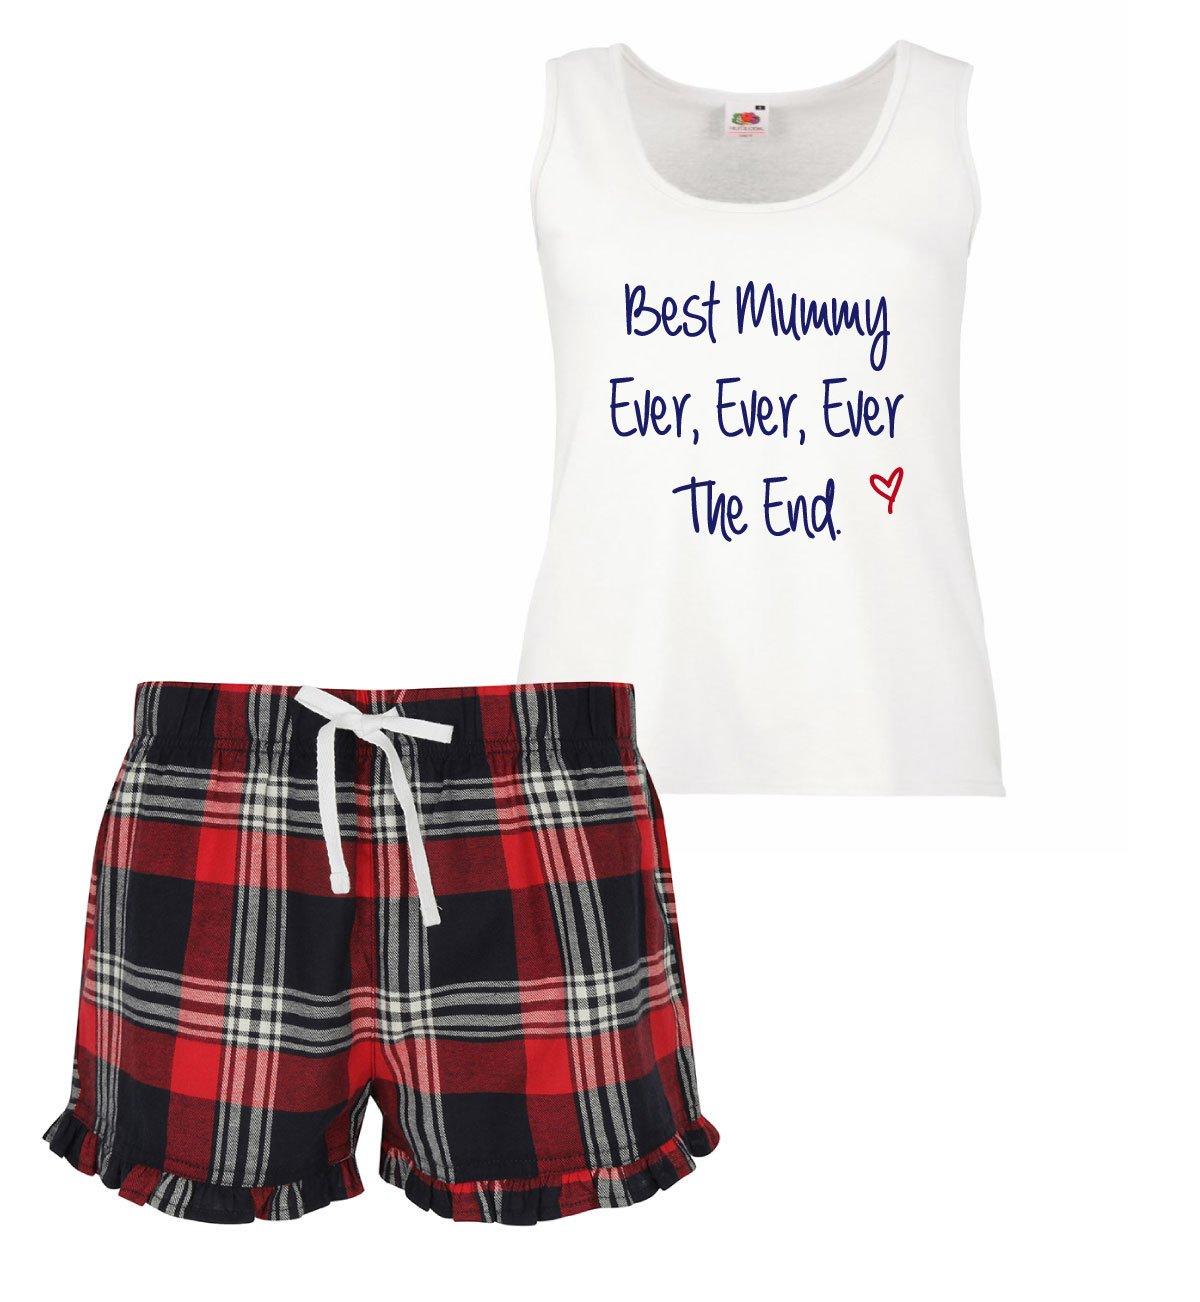 Best Mummy Ever Ever Ever The End Ladies Tartan Frill Short Pyjama Set Red Blue or Green Blue